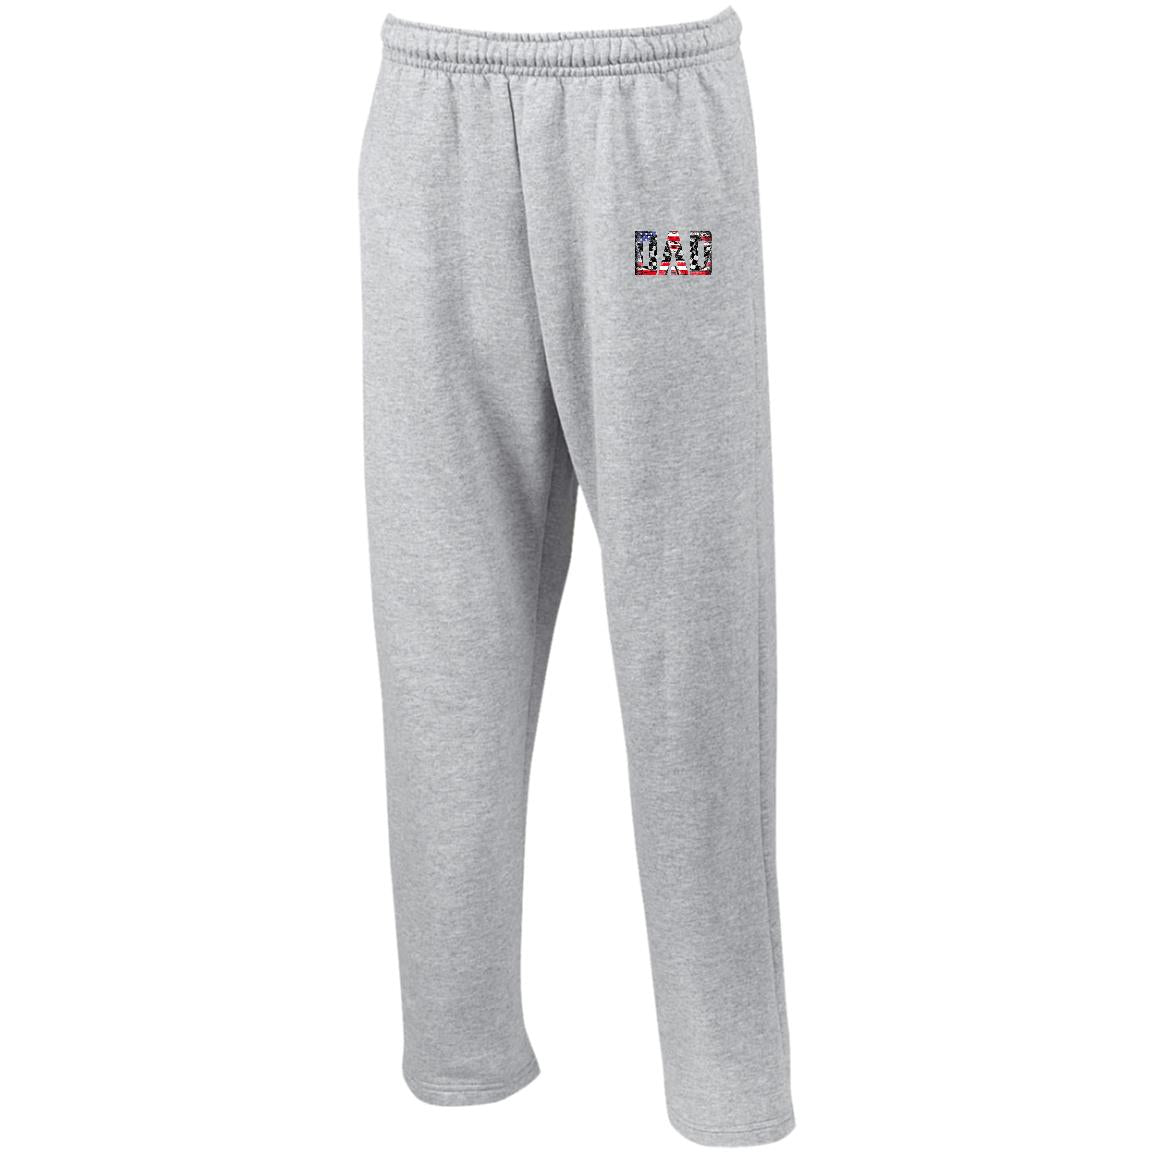 USA Racing Dad Open Bottom Sweatpants with Pockets